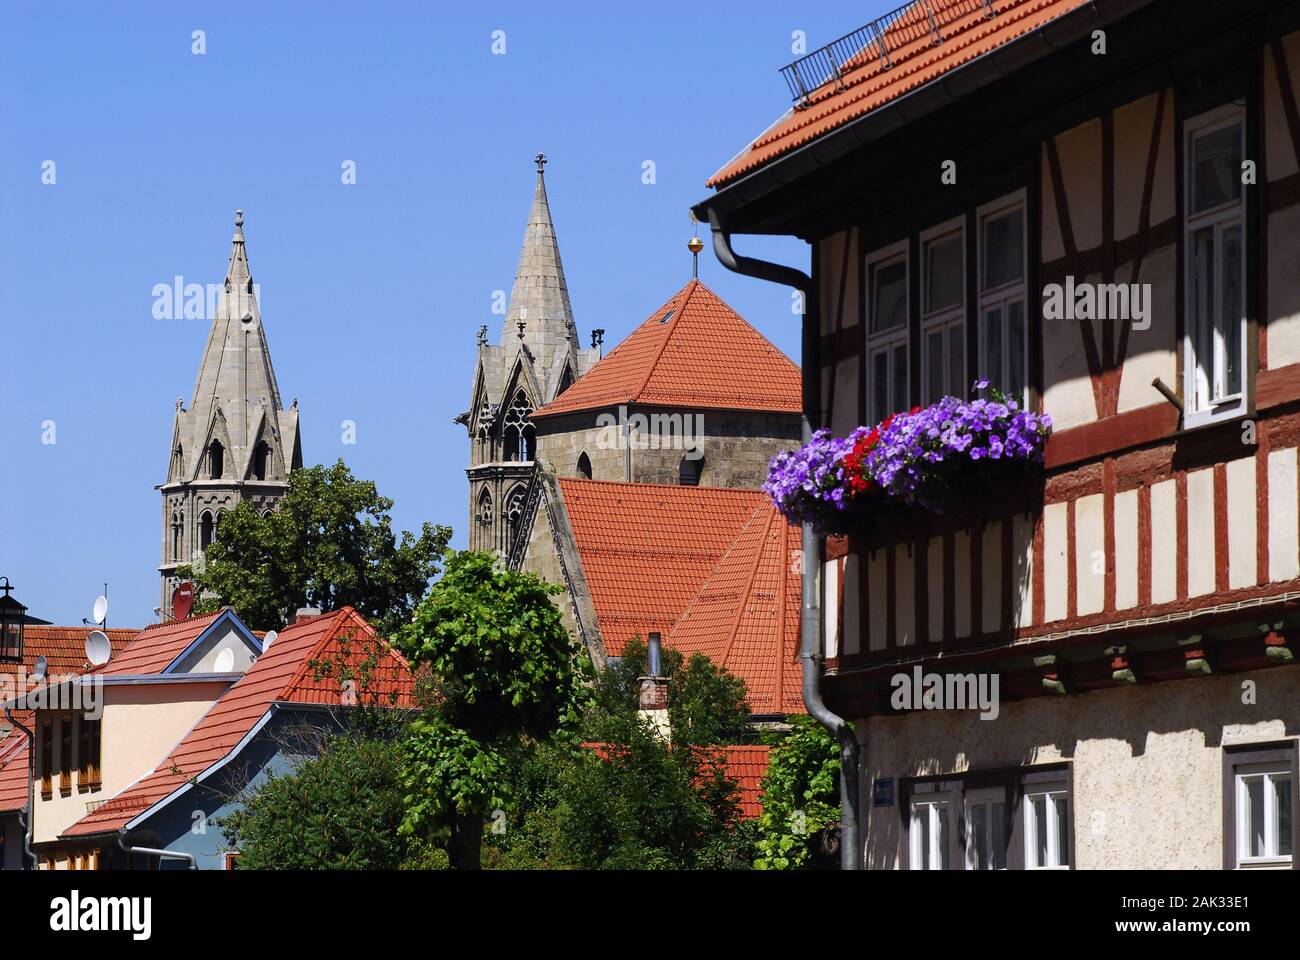 Church of Our Lady / Arnstadt Stock Photo - Alamy